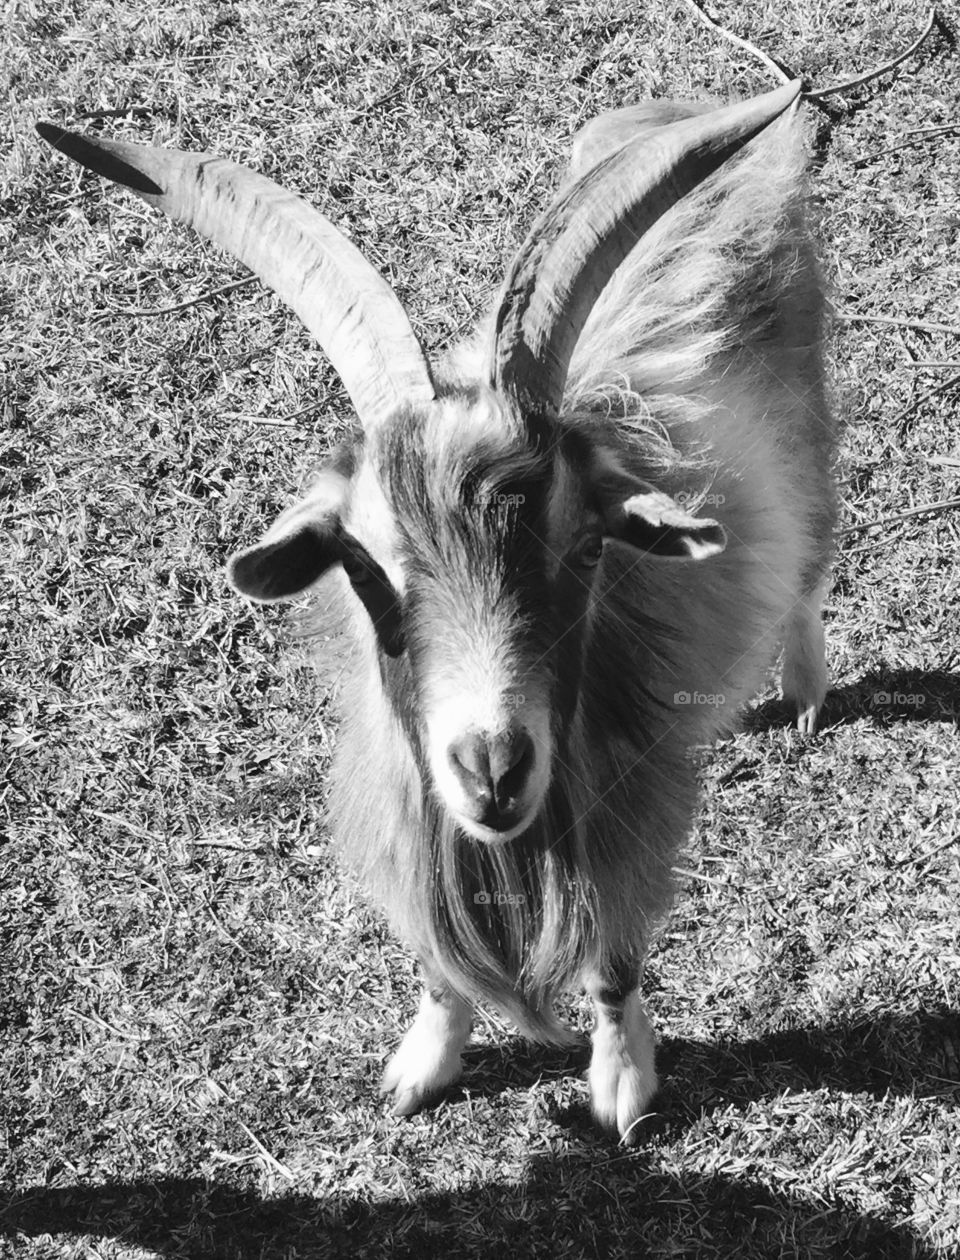 An up close shot of a goat in black and white color!